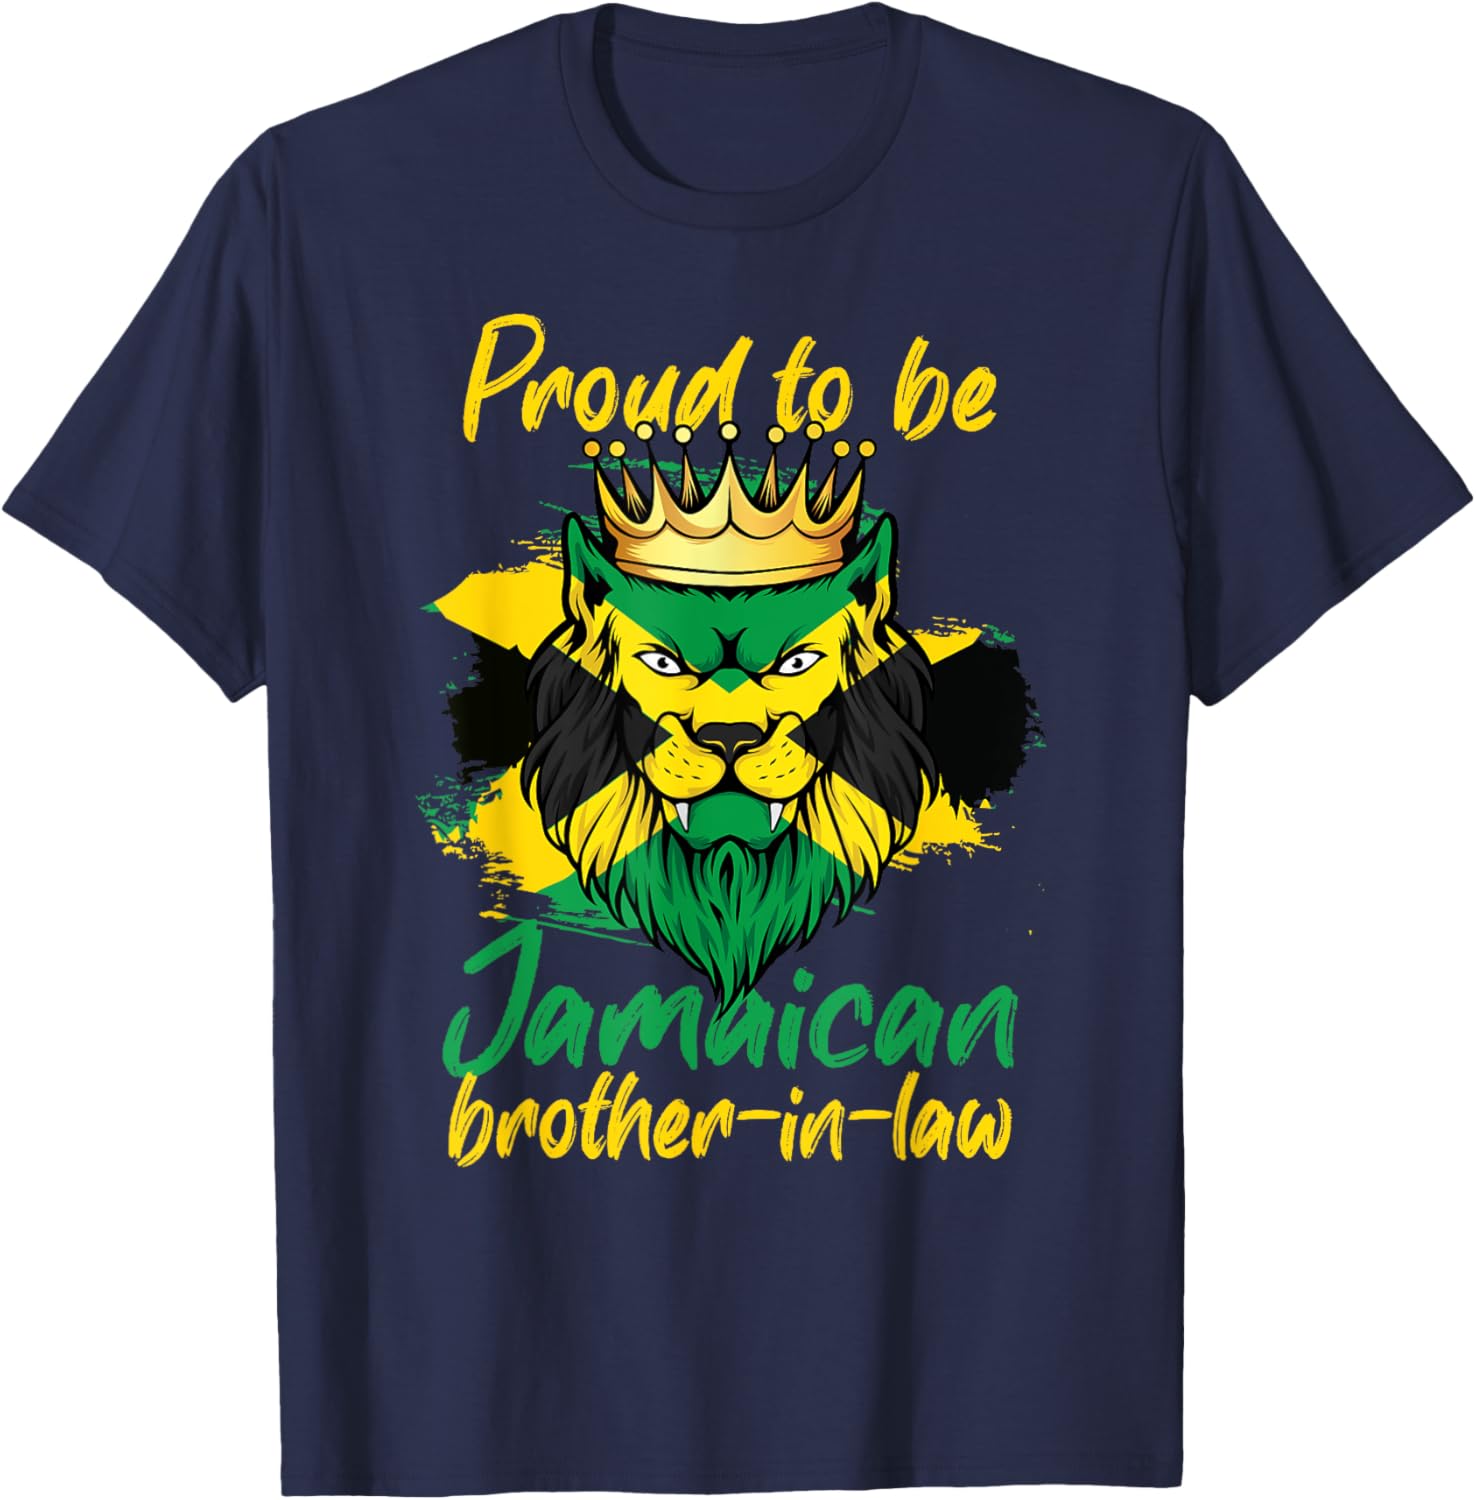 Celebrate Jamaican Heritage proud jamaican brother-in-law T-Shirt